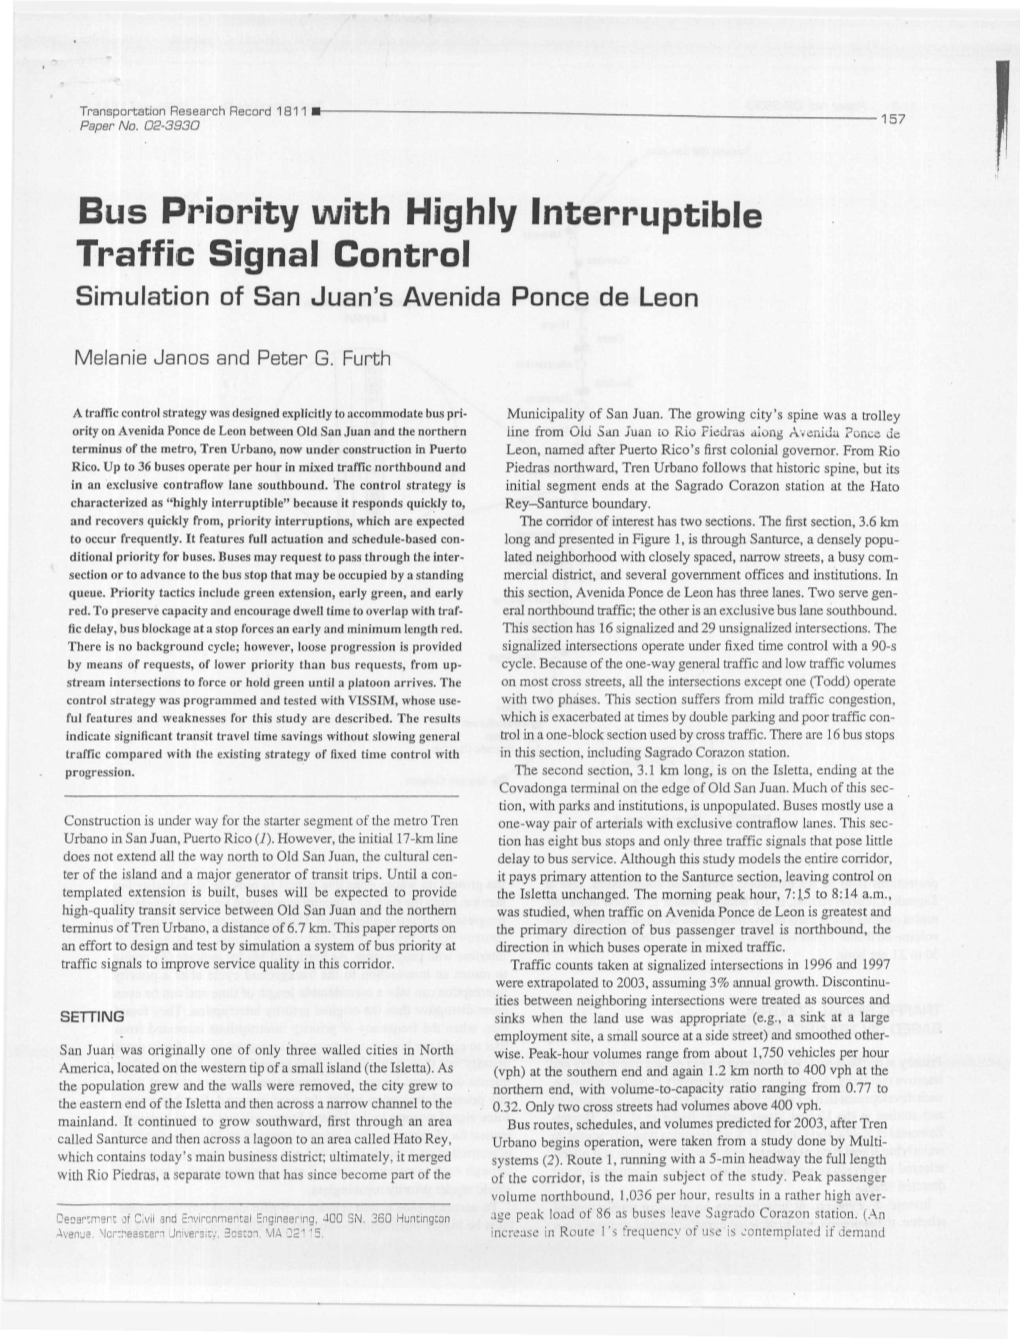 Bus Priority with Highly Interruptible Traffice Signal Control